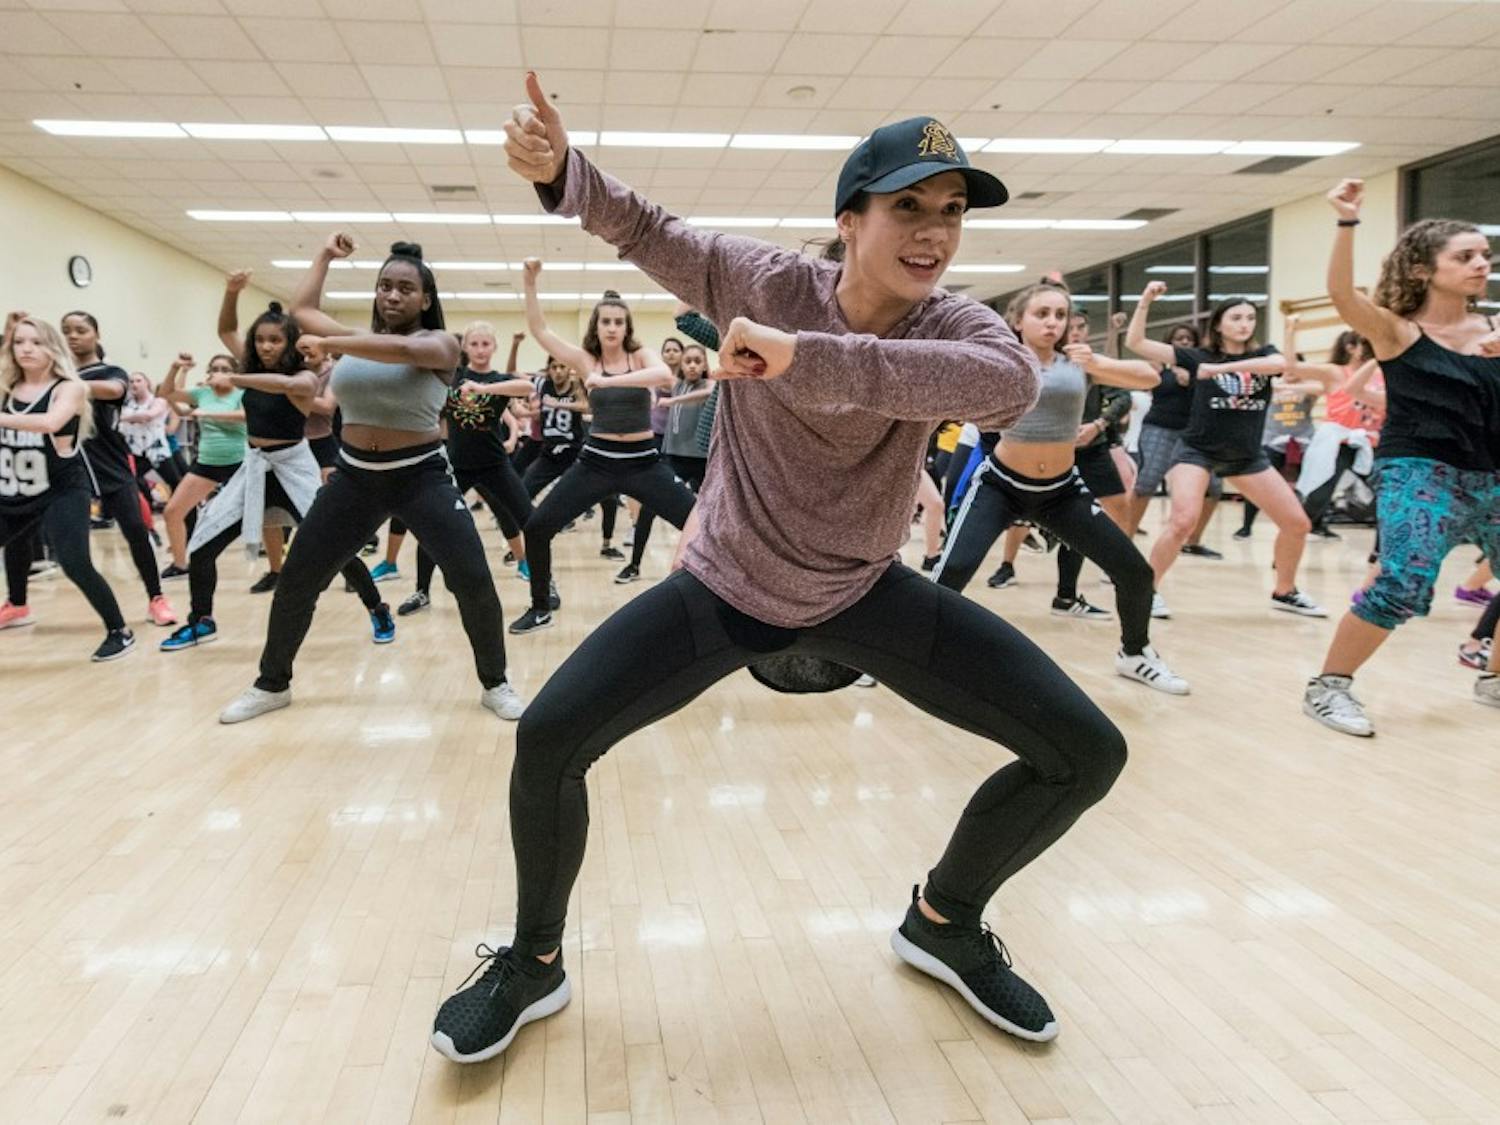 Brittany Hannish, a 2013 ASU graduate, teaches choreography to the Hip-Hop Coalition class being held in the Tempe Sun Devil Fitness Center on Tuesday Aug. 23, 2016. According to their club description, the Hip-Hop Coalition is a club with all levels of talent, which promotes all styles of hip-hop through freestyling and choreography.